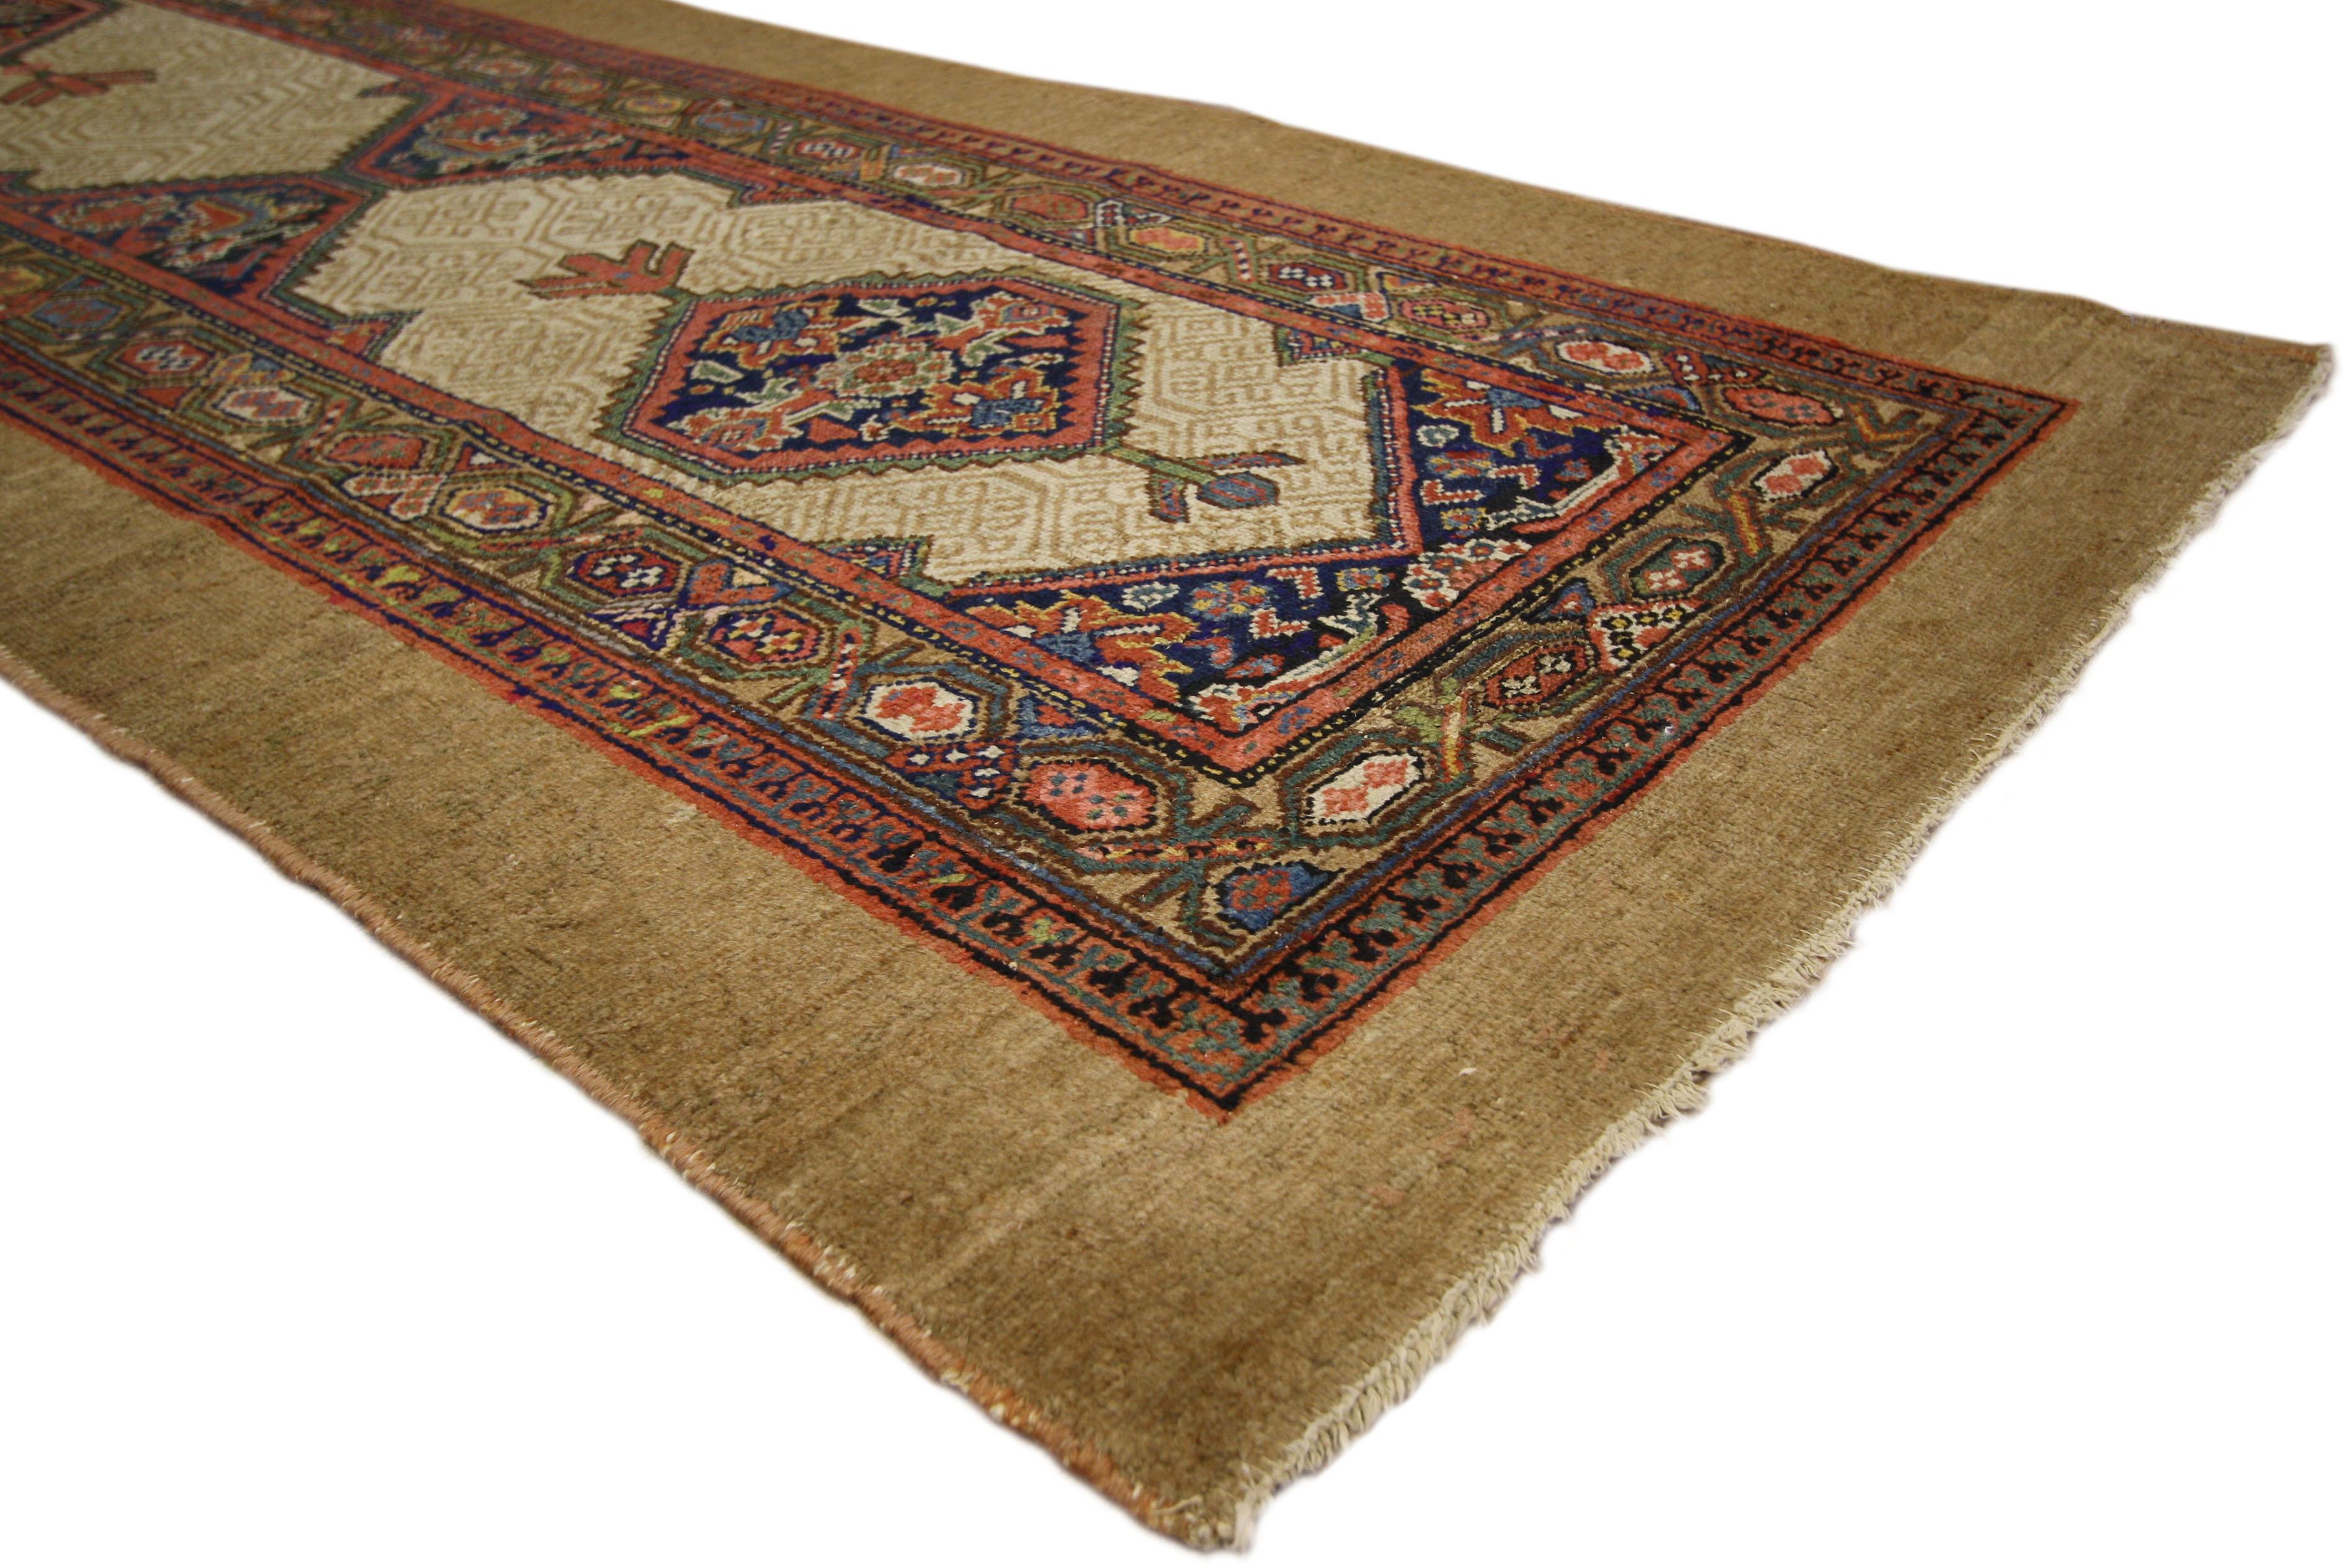 73688, antique Persian Malayer Camel Hair runner, hallway runner. This antique Persian Malayer runner is made with hand-knotted wool and camel hair. The antique Persian runner features two off-set stair-step hexagonal medallions anchored with